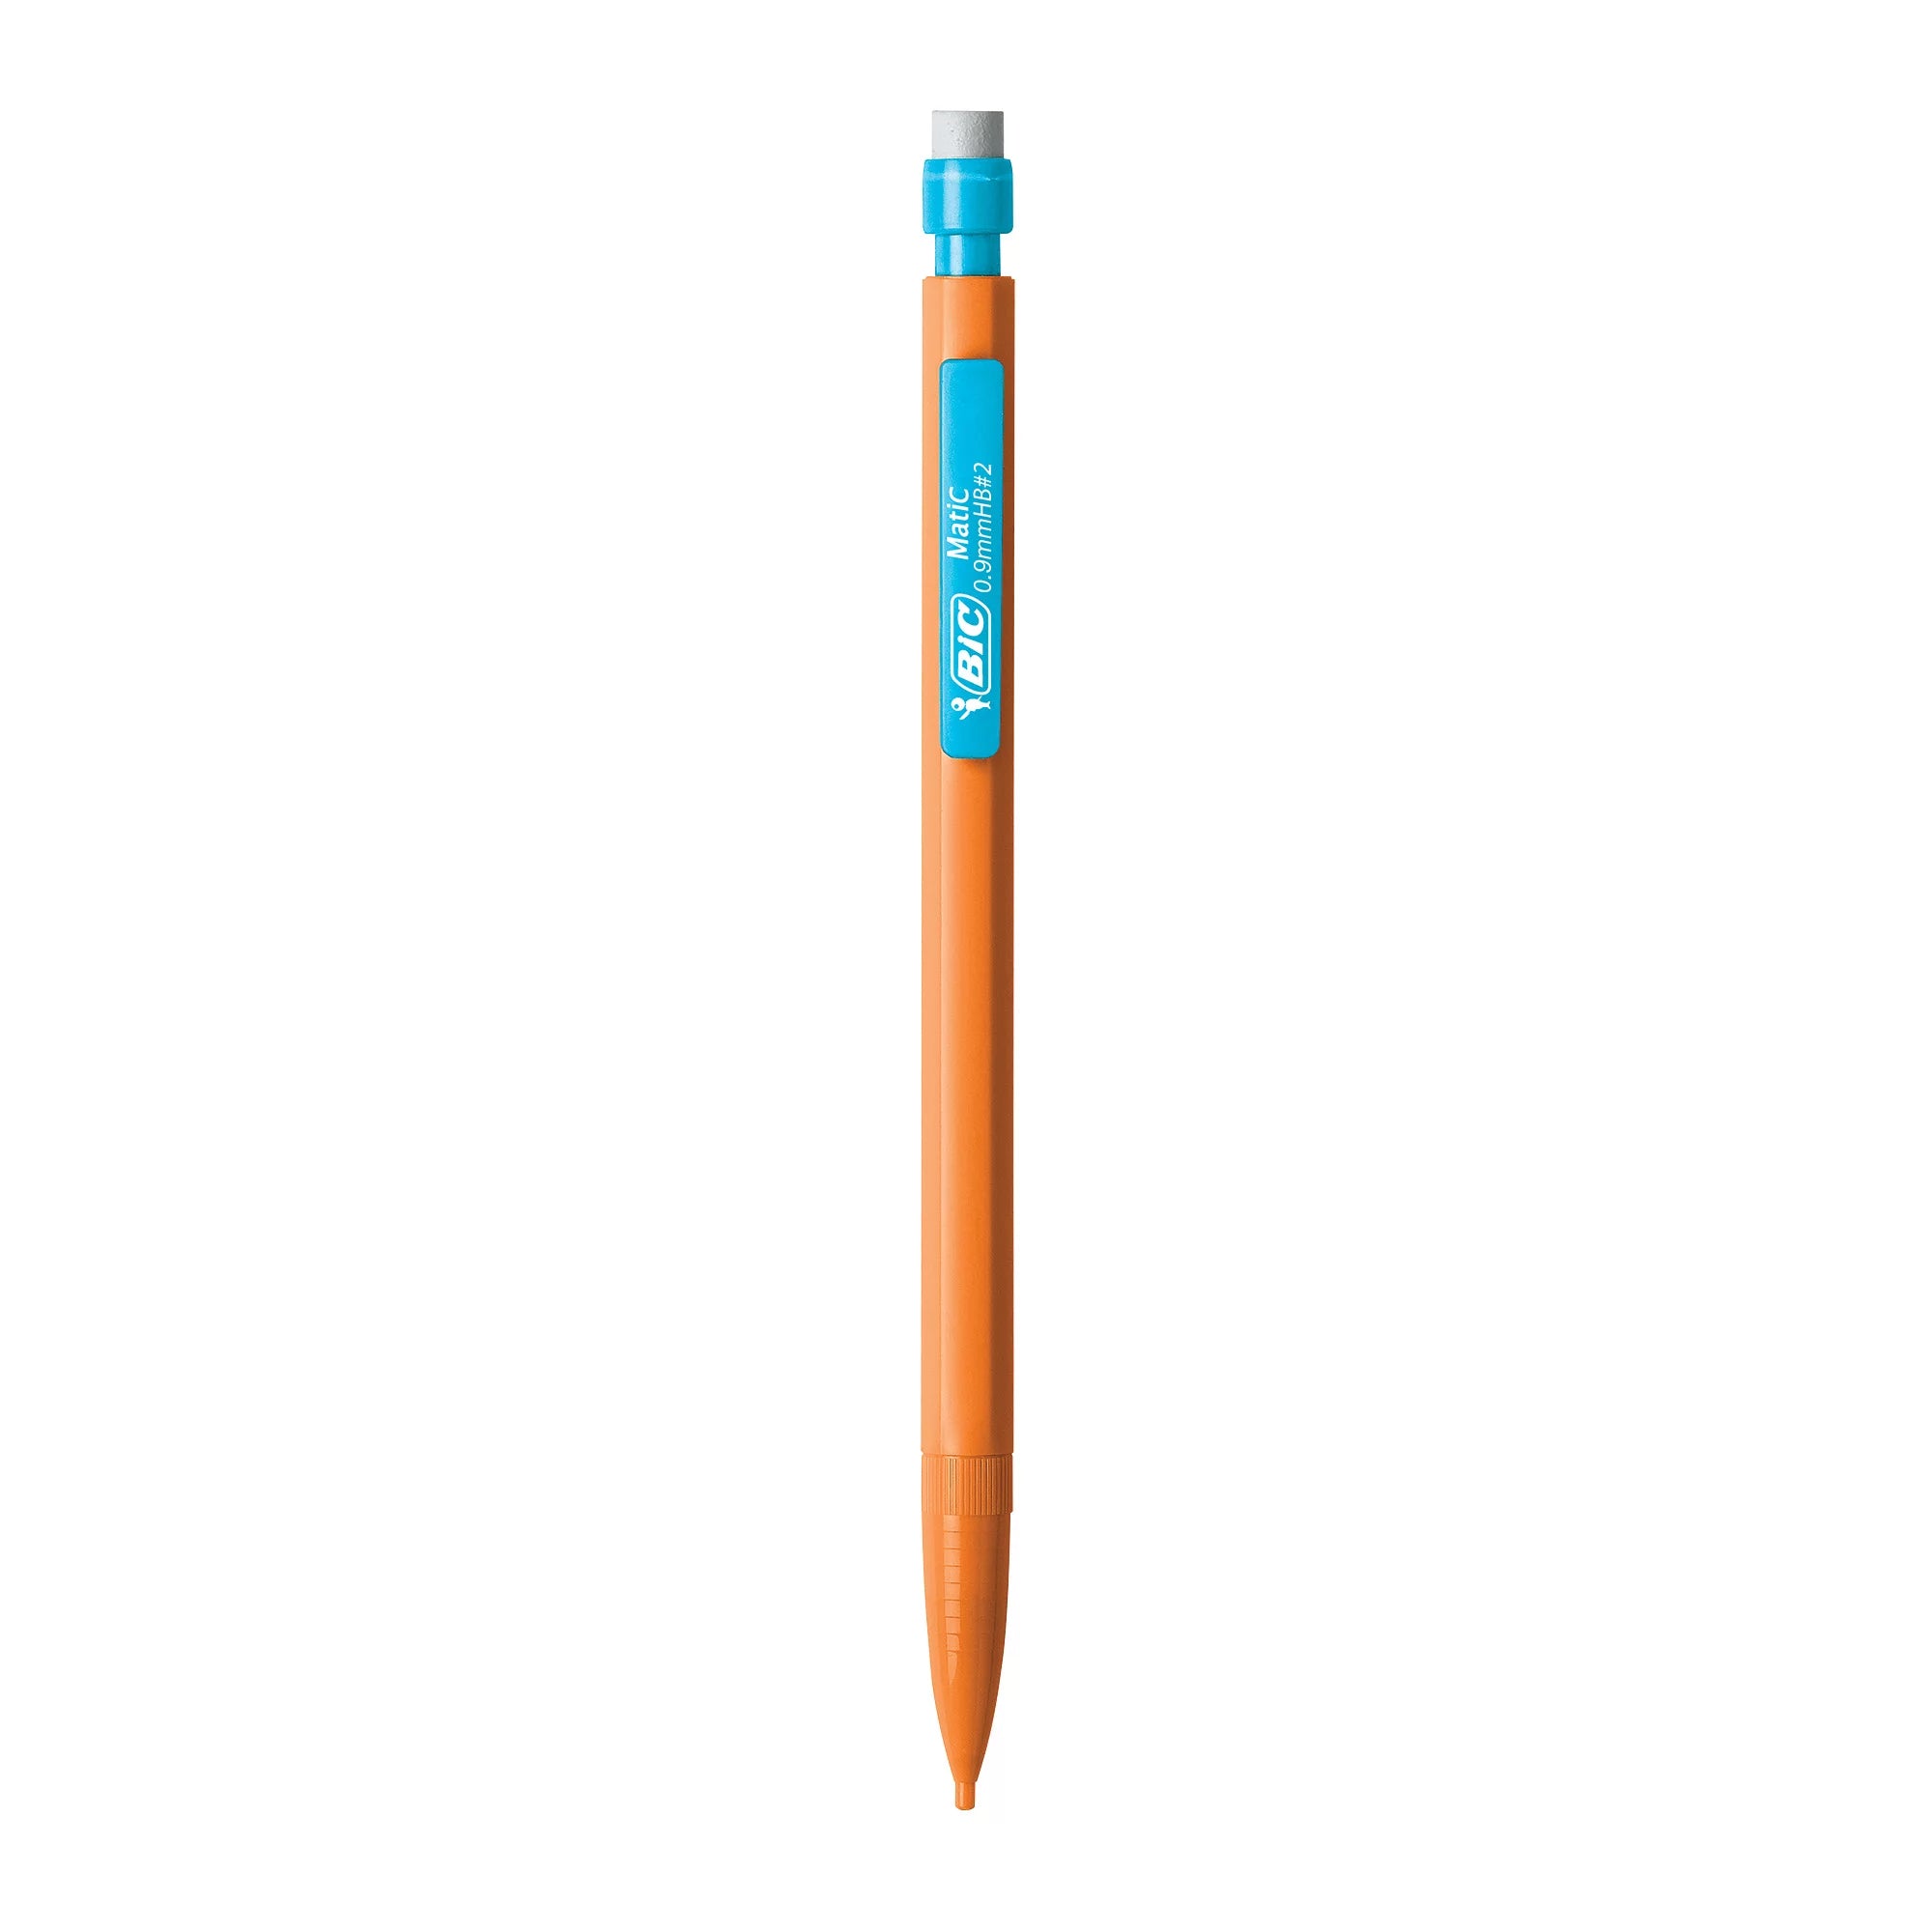 BIC Mechanical Pencil Extra Strong, Mechanical Pencils With Eraser for School or Work - Thick Point (0.9mm) - BumbleToys - 14 Years & Up, 18+, 5-7 Years, 6+ Years, 8-13 Years, bic, Drawing & Painting, OXE, Pencil, School Supplies, Stationery & Stickers